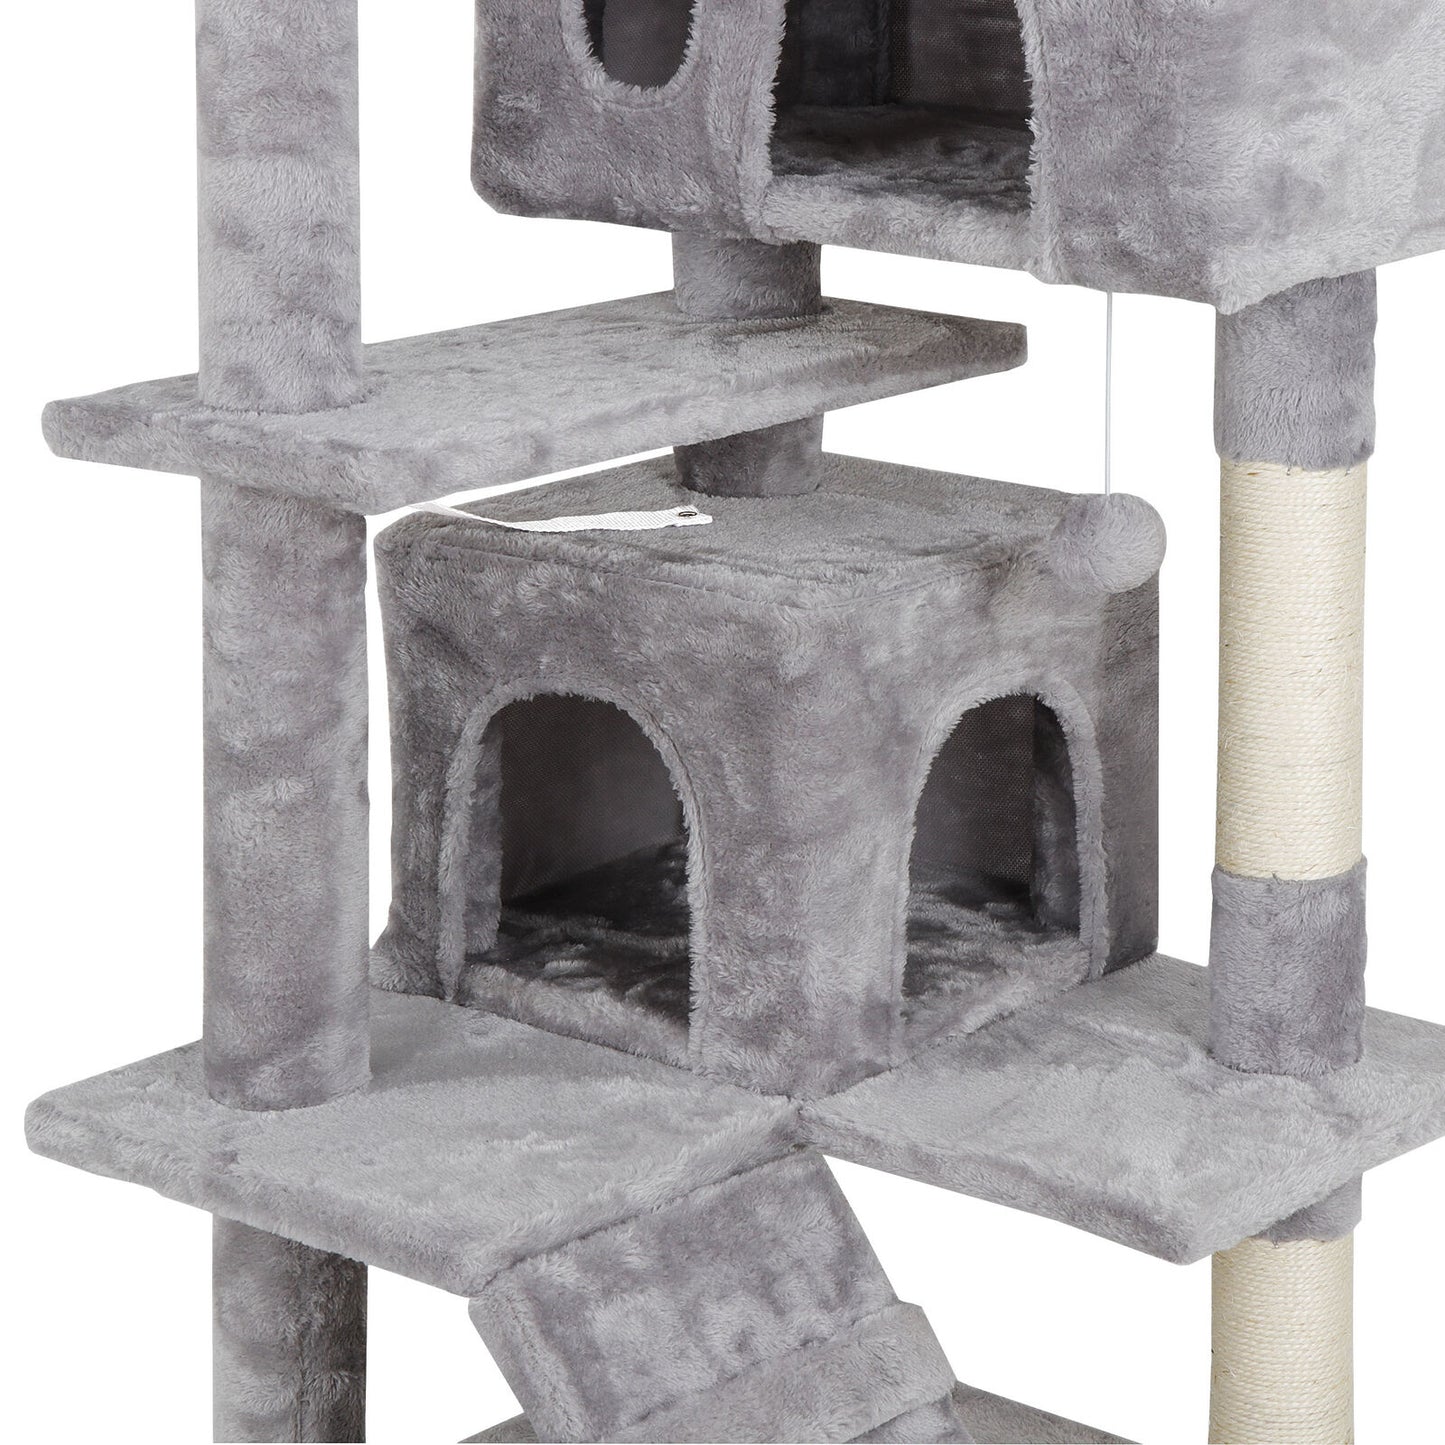 Activity Tower Pet Cat Tree 53" Kitty Furniture with Sisal-Covered Scratch Post